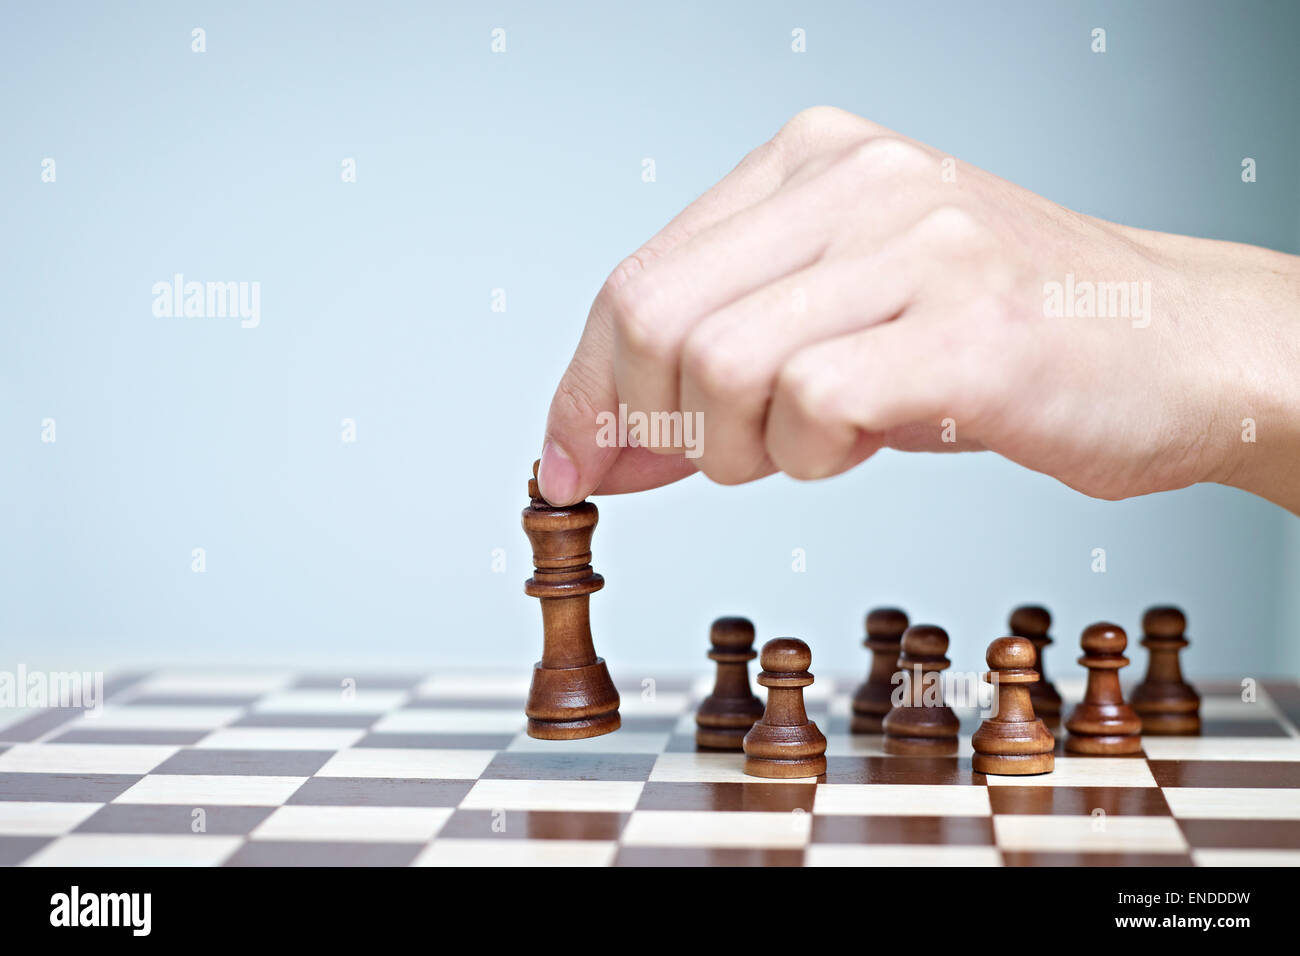 hand picking up and moving a chess piece. Stock Photo